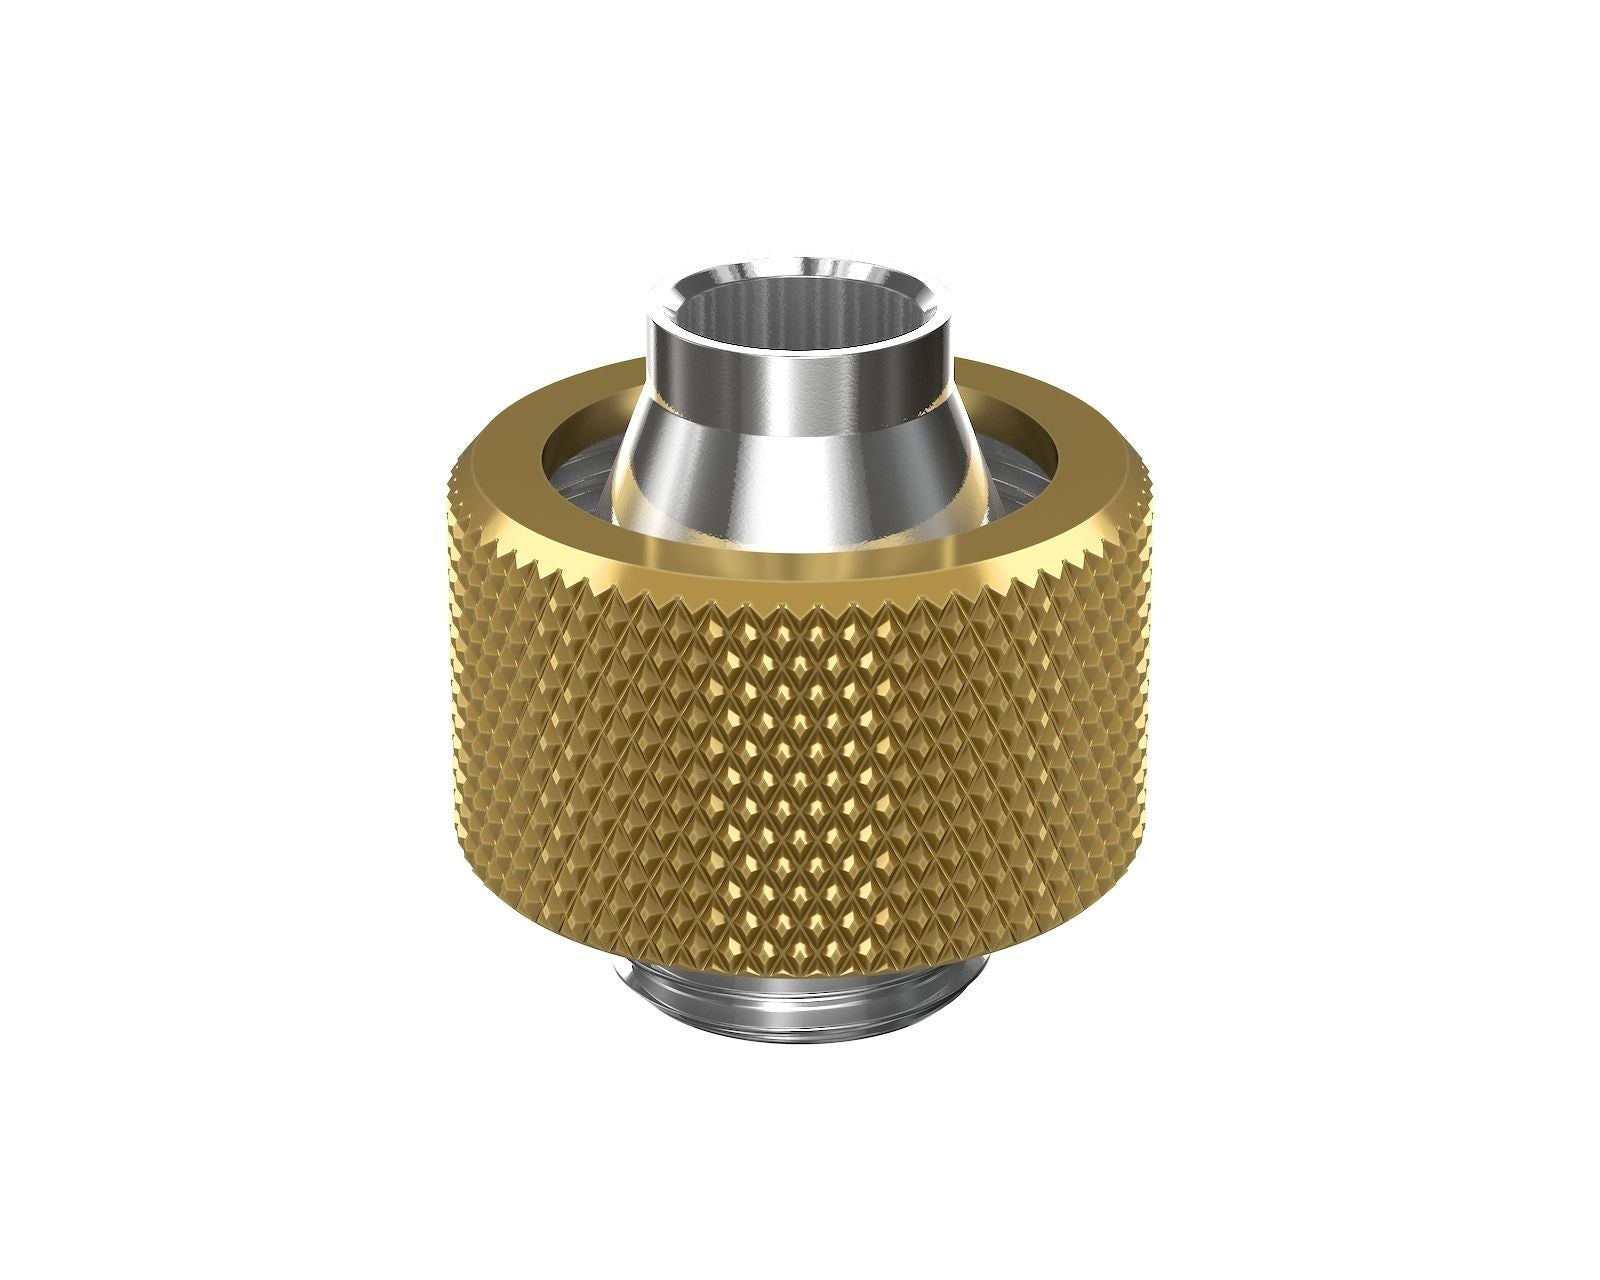 PrimoChill SecureFit SX - Premium Compression Fitting For 3/8in ID x 5/8in OD Flexible Tubing (F-SFSX58) - Available in 20+ Colors, Custom Watercooling Loop Ready - Candy Gold